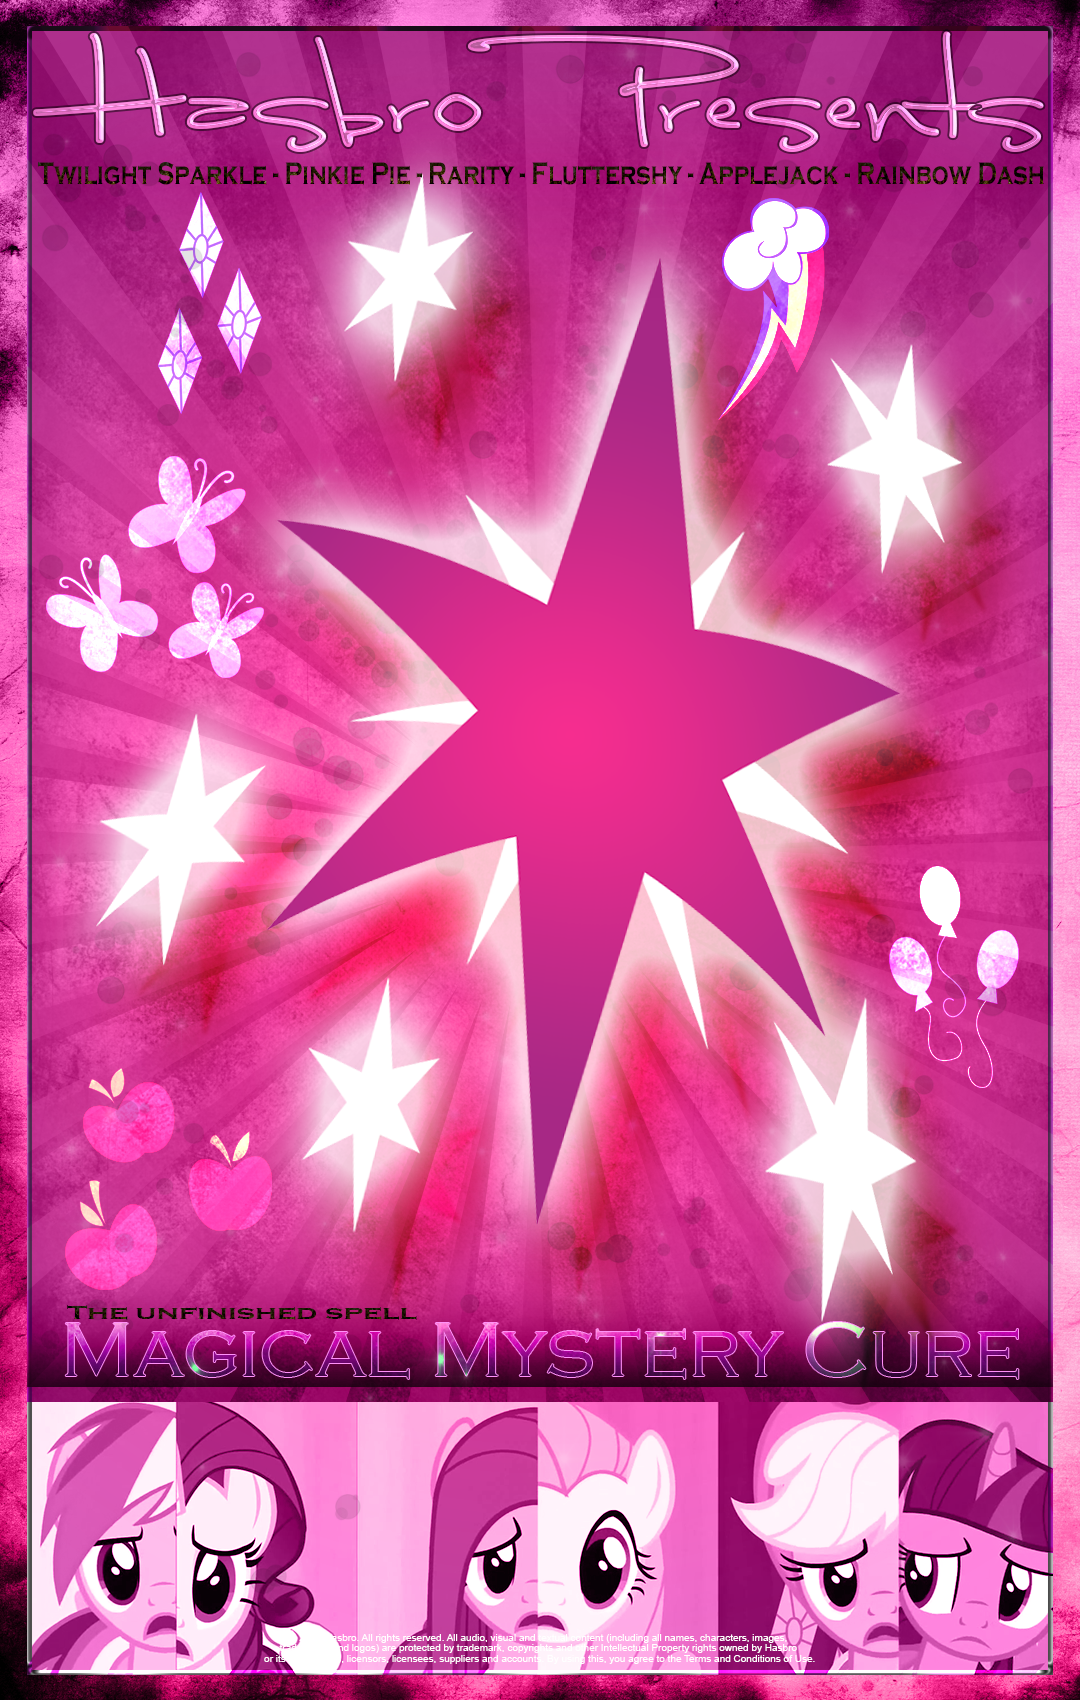 mlp___magical_mystery_cure___movie_poster_by_pims1978-d5v696j.png